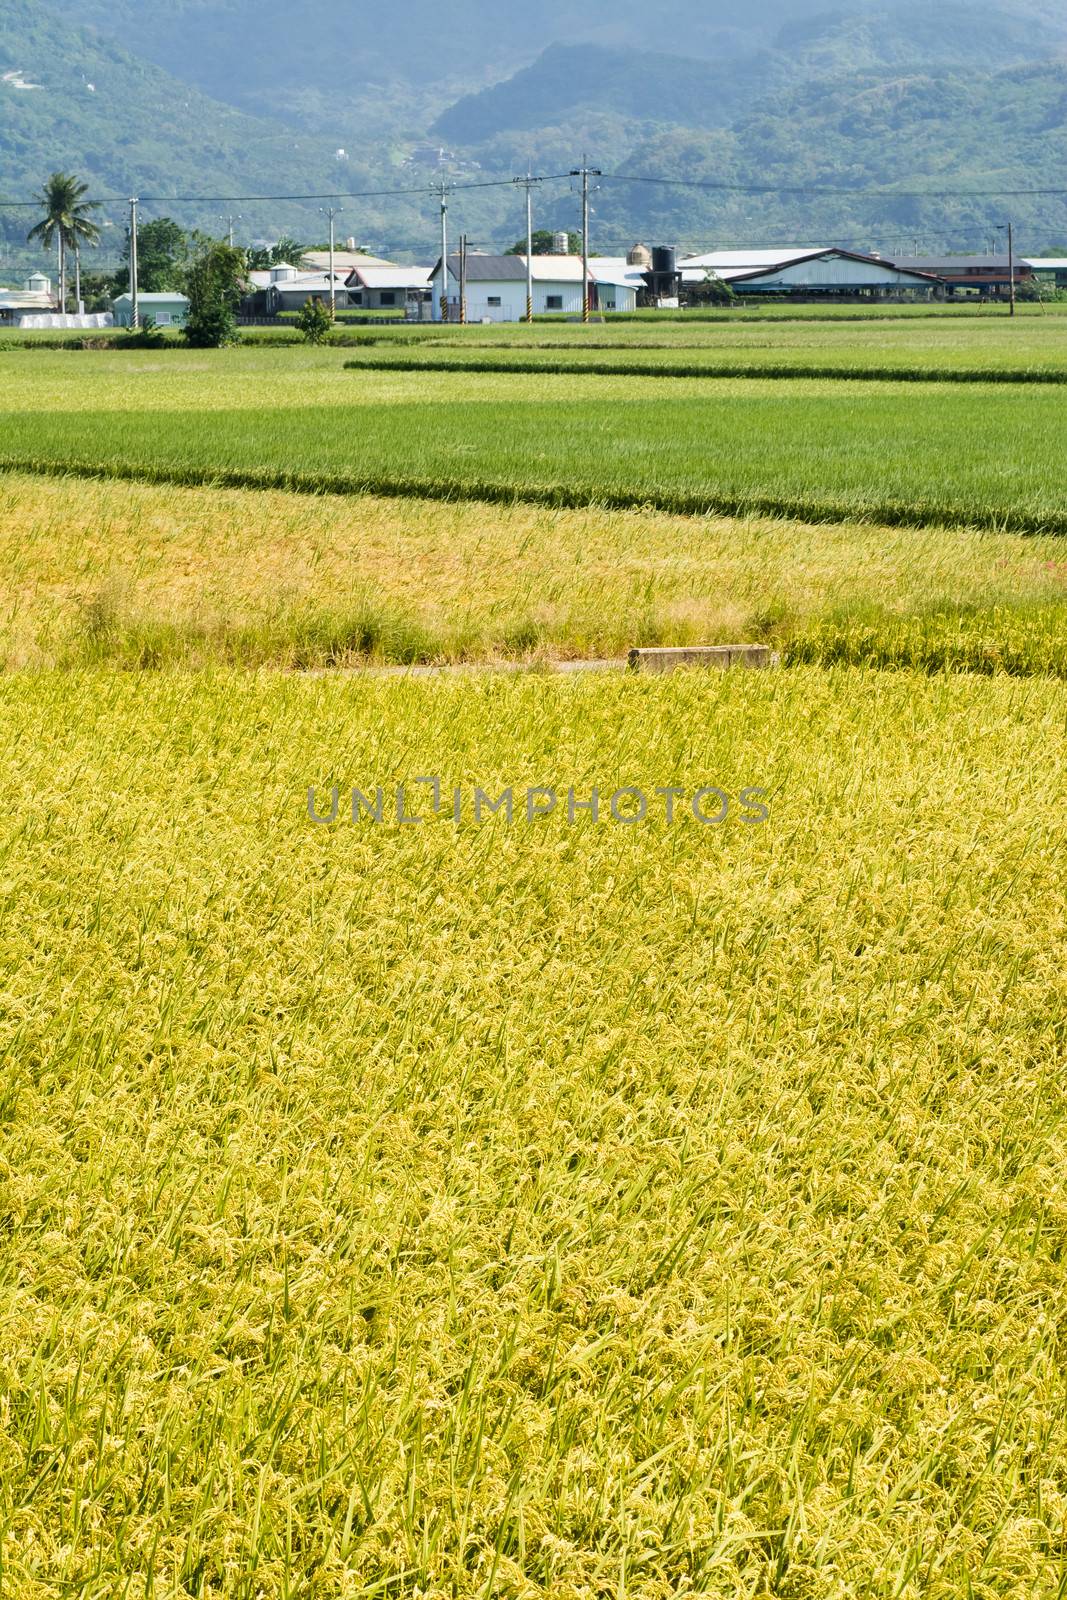 Rural scenery with golden paddy rice farm in Hualien, Taiwan, Asia.